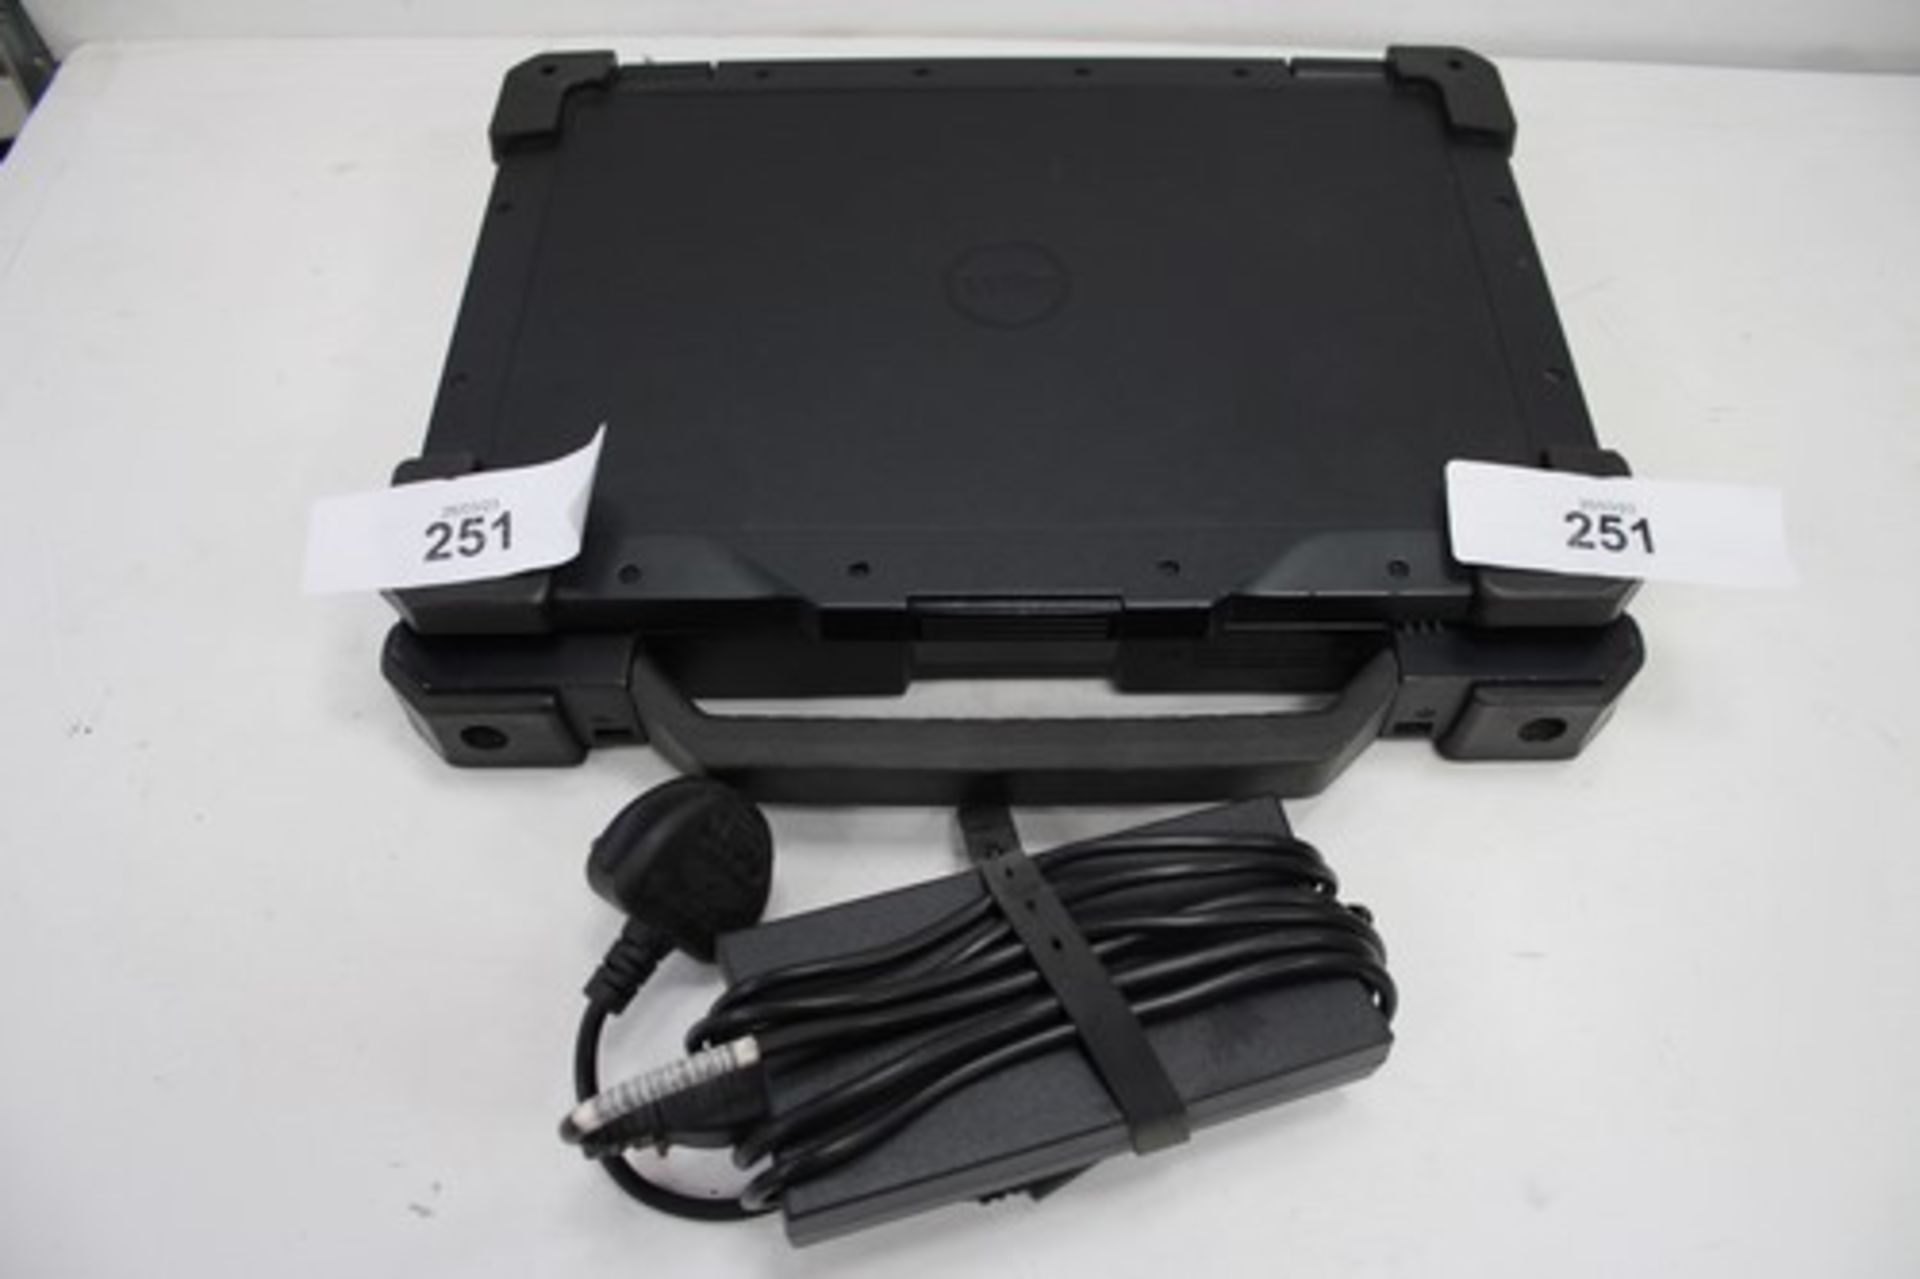 1 x Dell P45G, model: Latitude 14" rugged extreme 7414 laptop with 156300U processor, 8gb ram, - Image 6 of 7